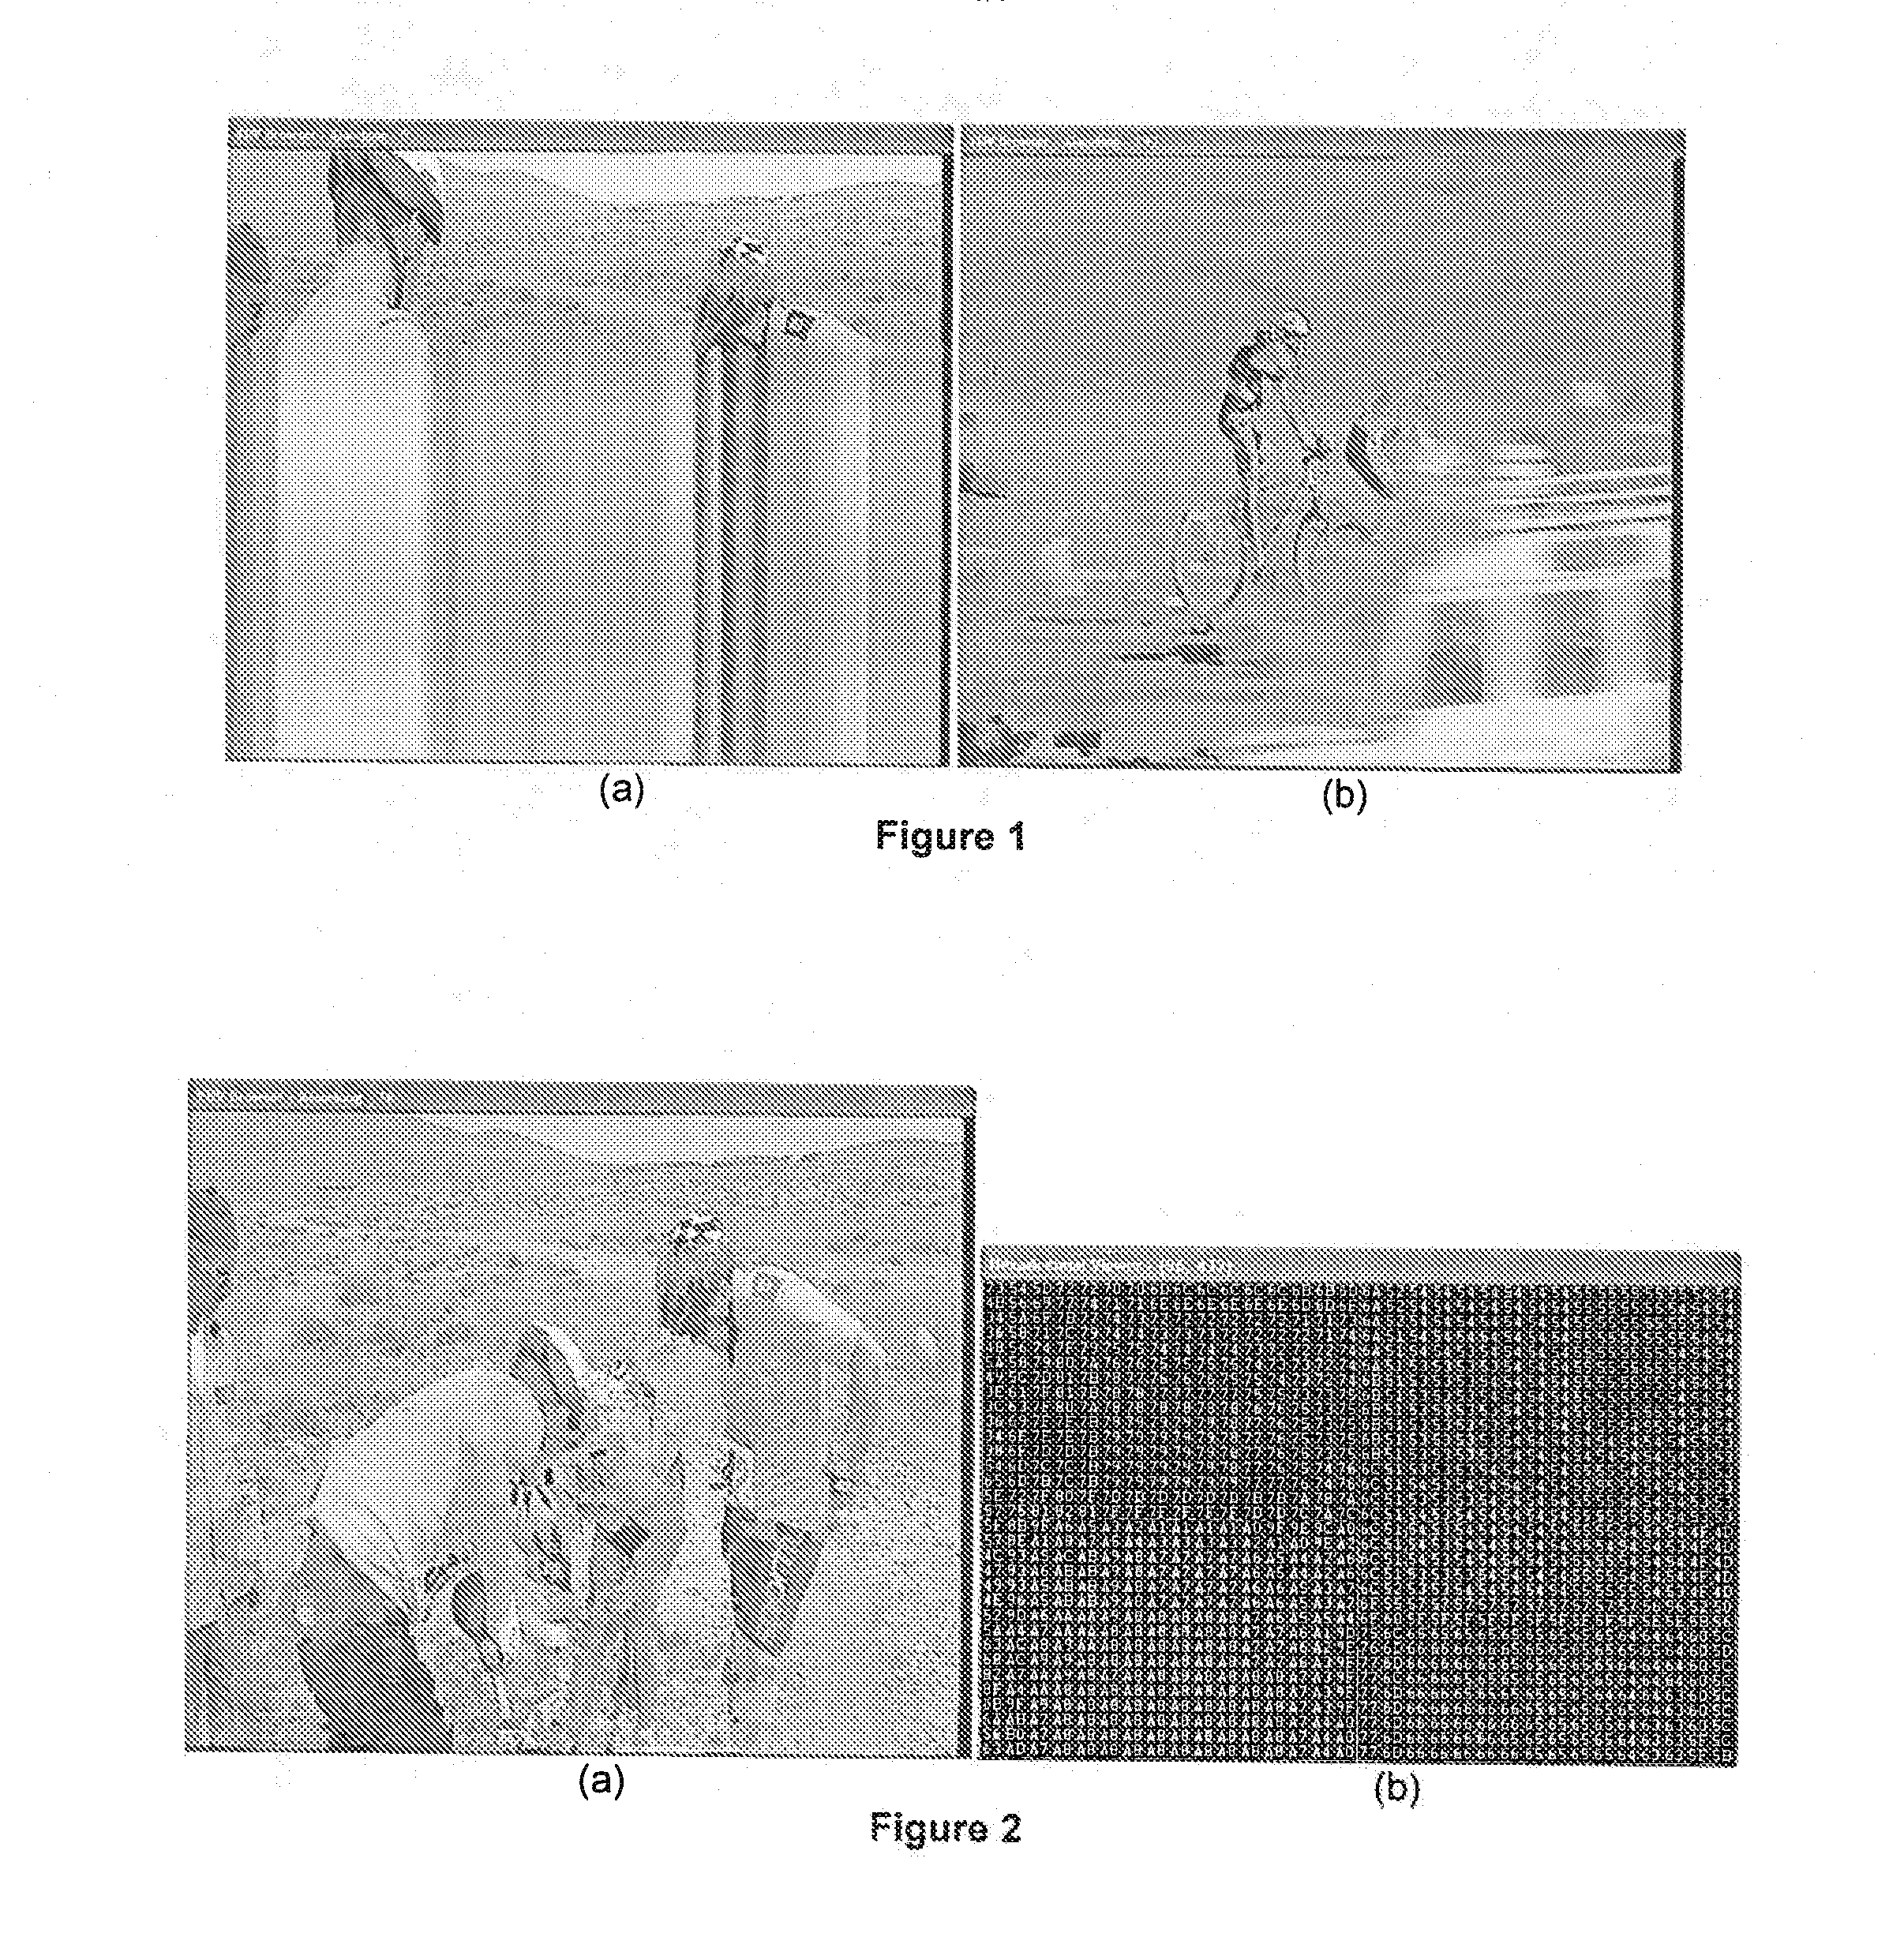 Methods and apparatus for an artifact detection scheme based on image content